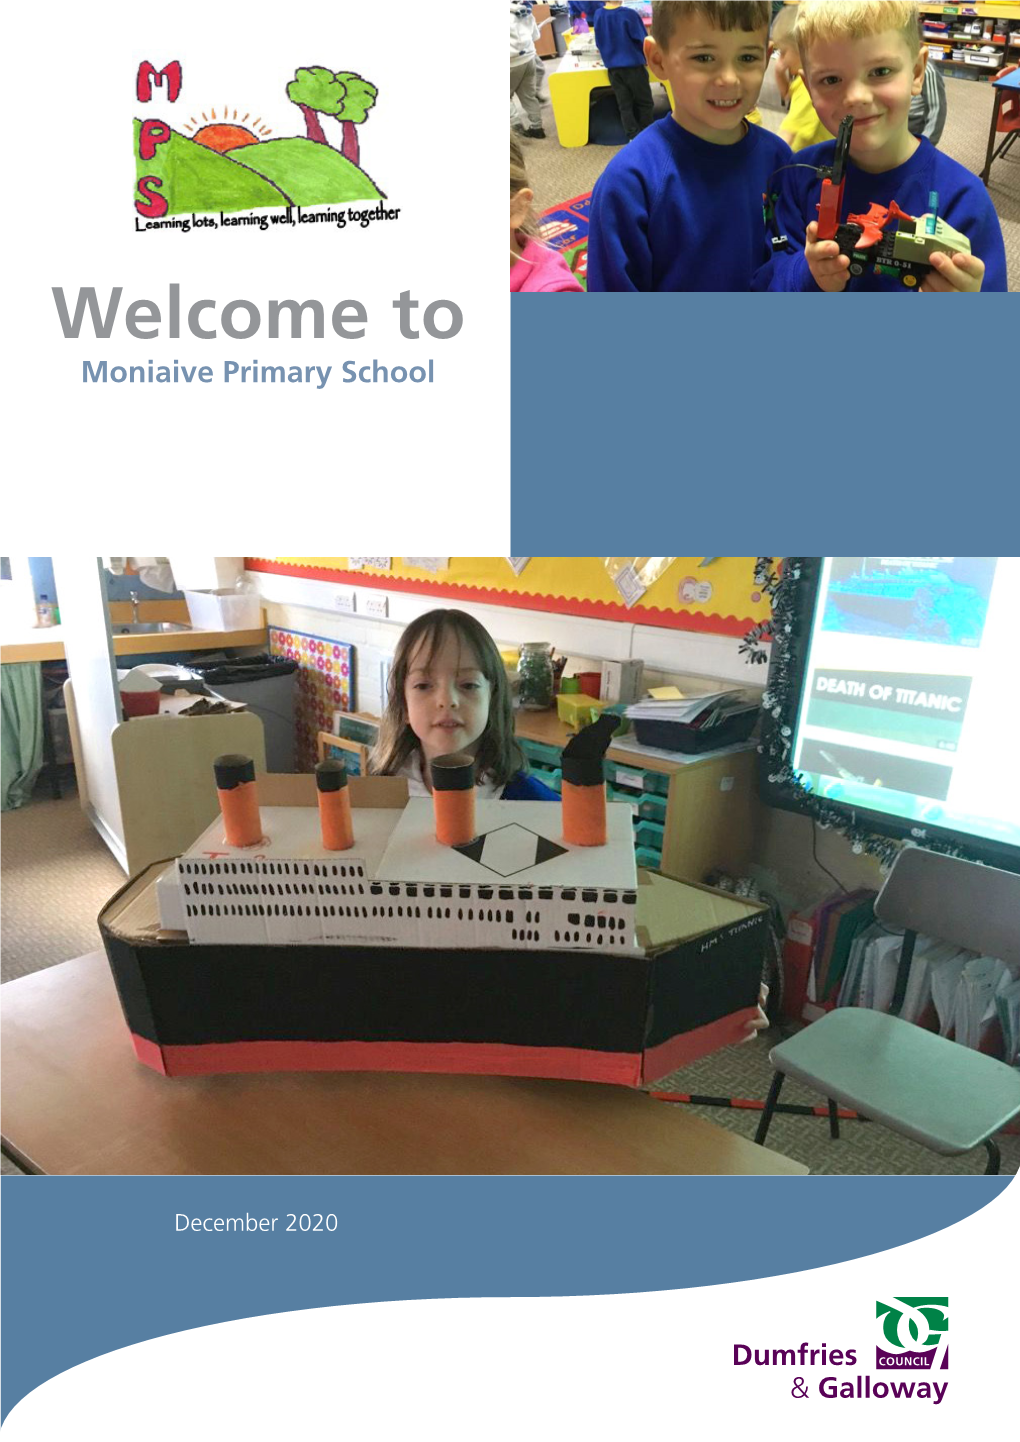 Welcome to Moniaive Primary School